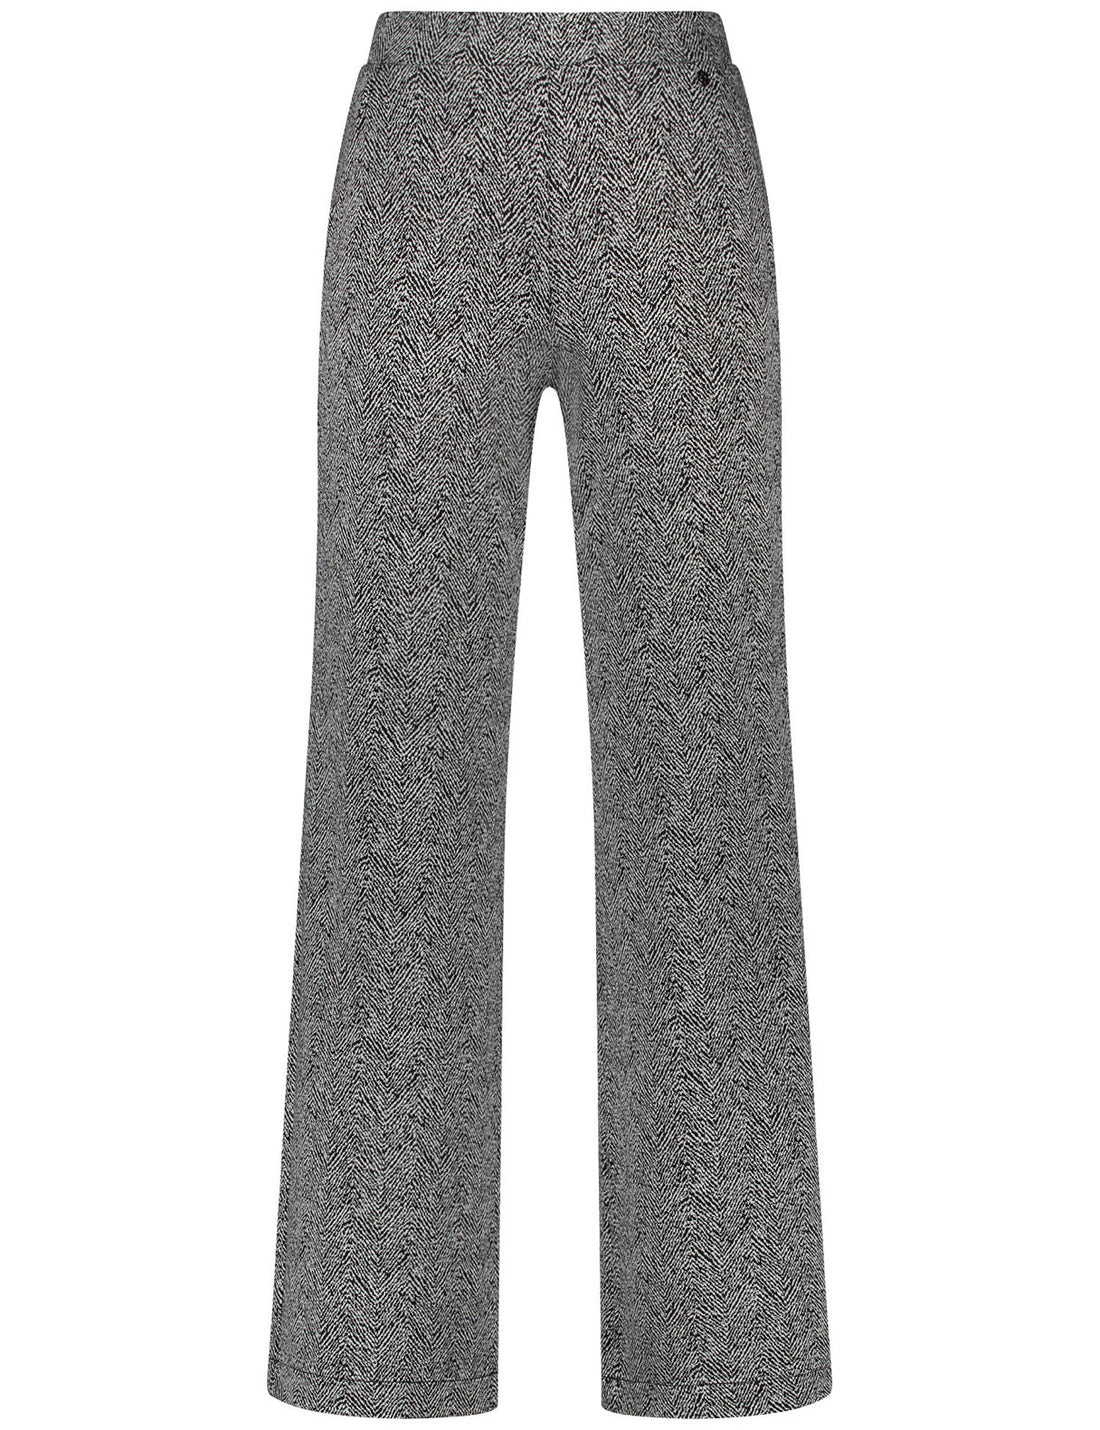 Pull-On Trousers With A Wide Leg And A Fine Houndstooth Pattern_122085-66281_1090_02